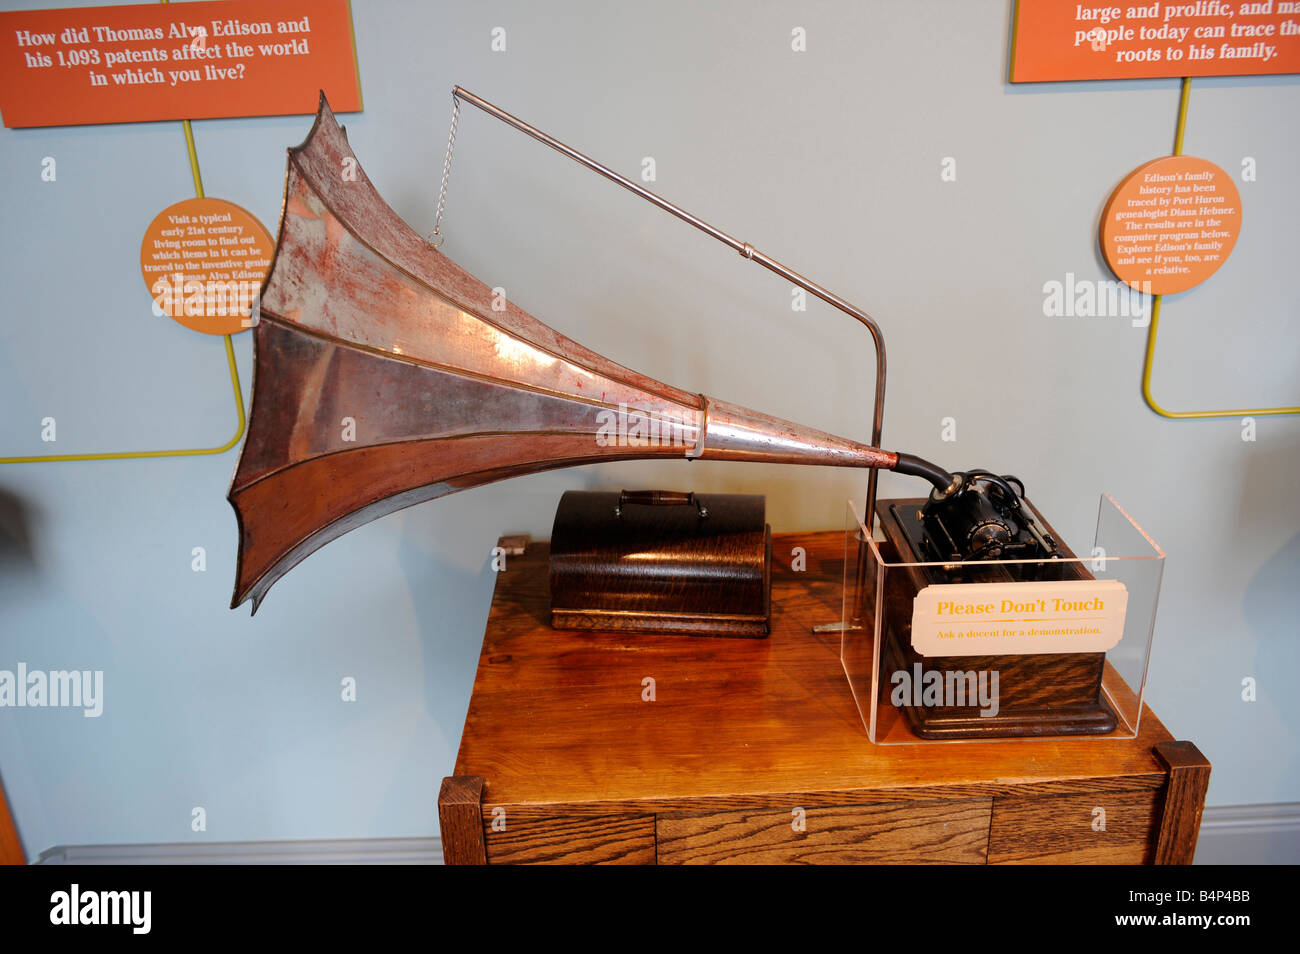 Early phonograph invented by Thomas Elva Edison is on display in a museum in his boyhood town of Port Huron Michigan Stock Photo